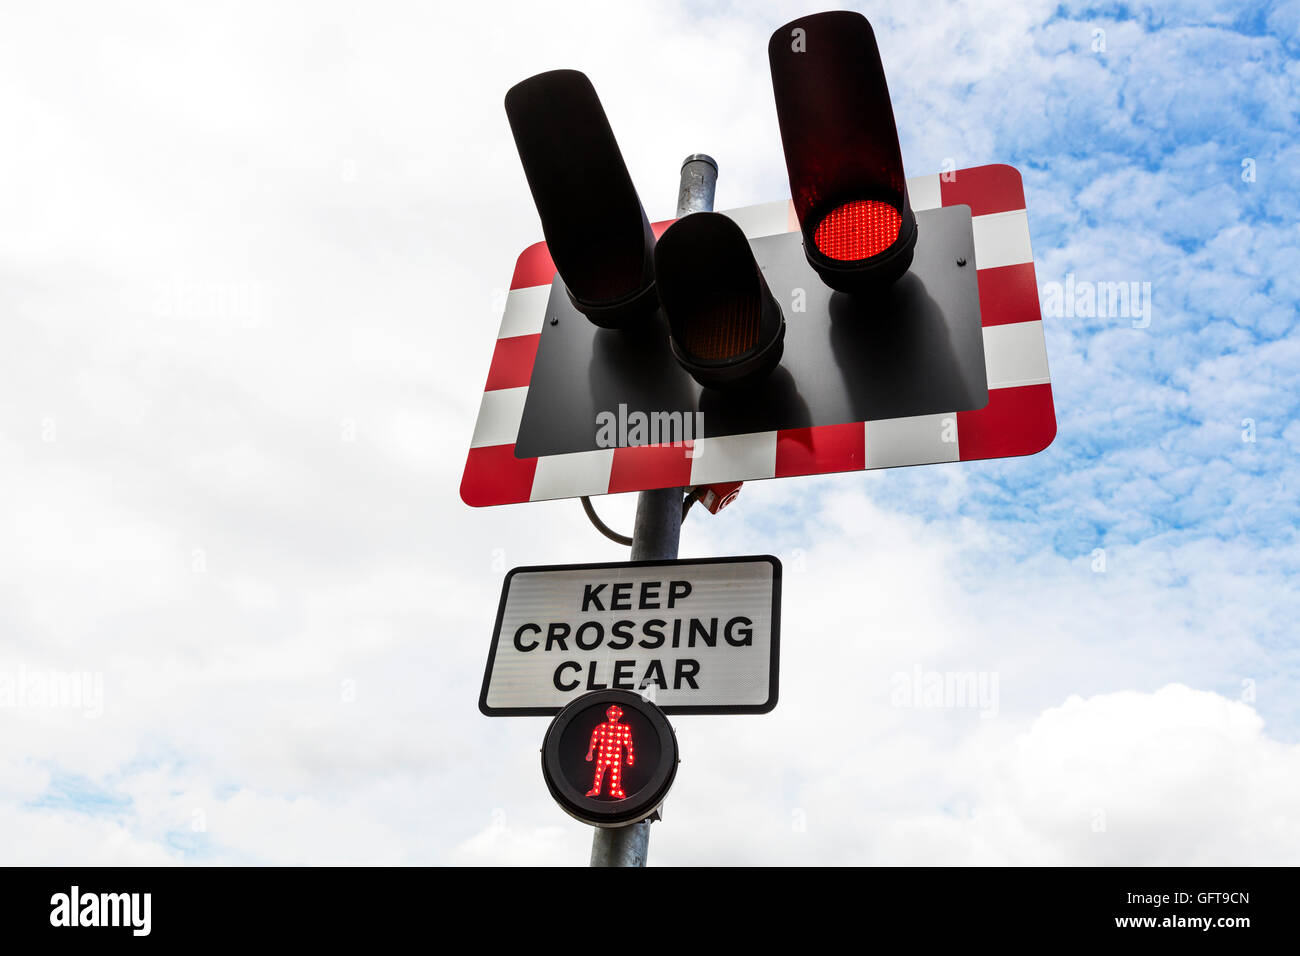 Level crossing lights flashing warning of train coming danger do not cross keep crossing clear sign UK England GB Stock Photo